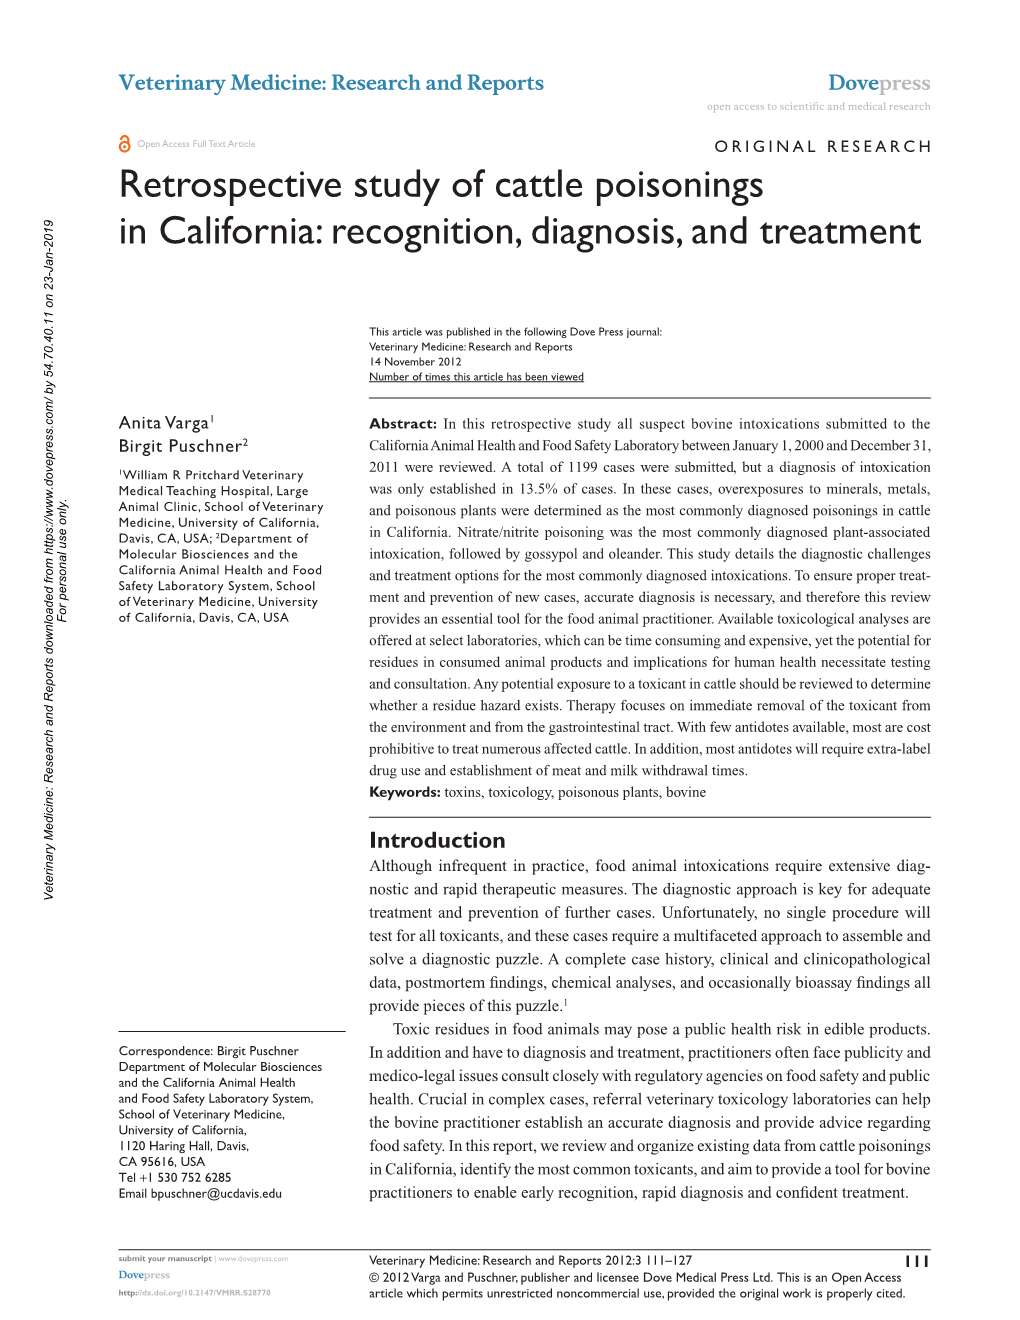 Retrospective Study of Cattle Poisonings in California: Recognition, Diagnosis, and Treatment